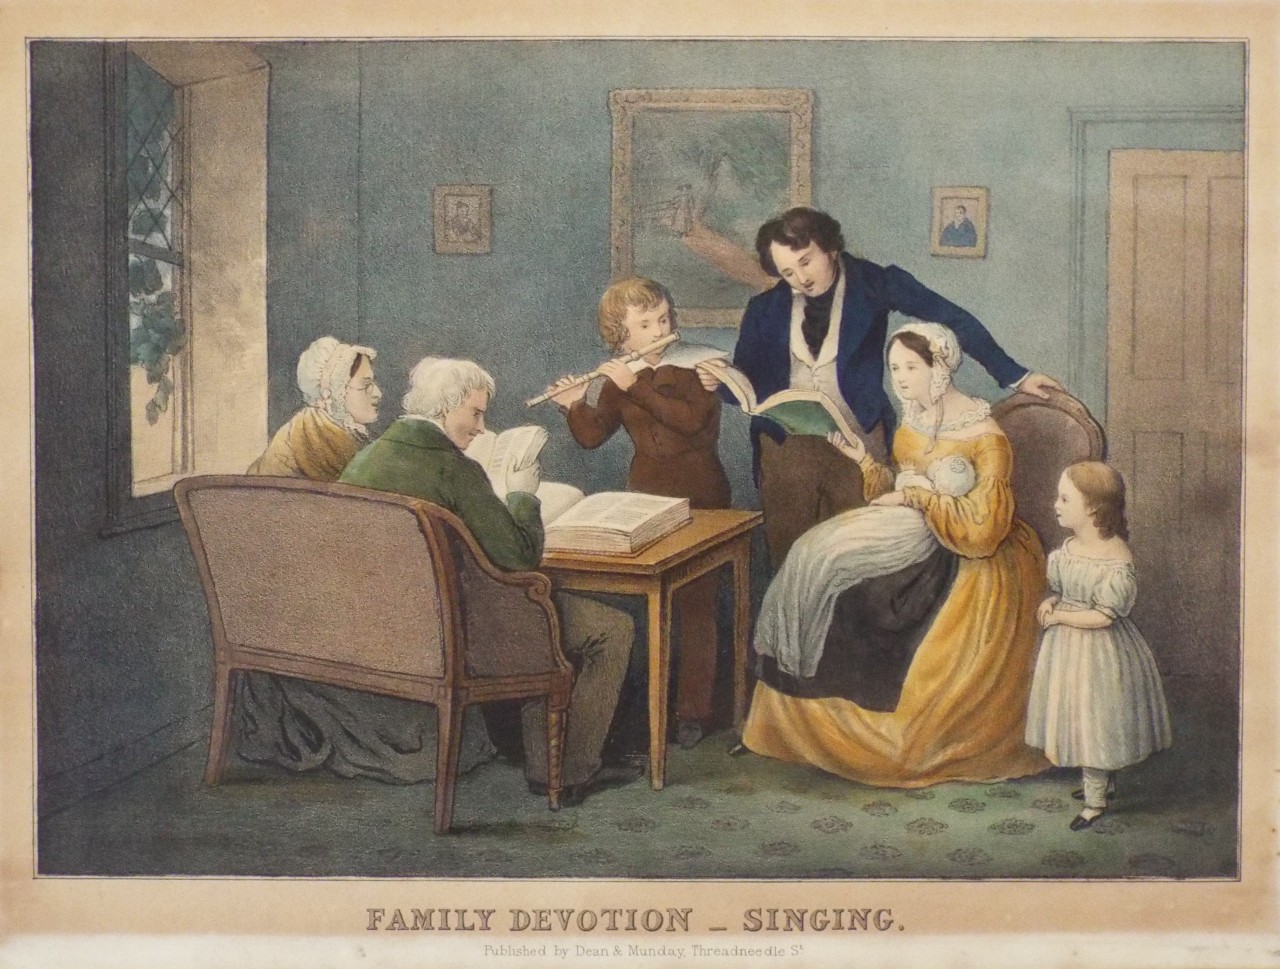 Lithograph - Family Devotion - Singing.